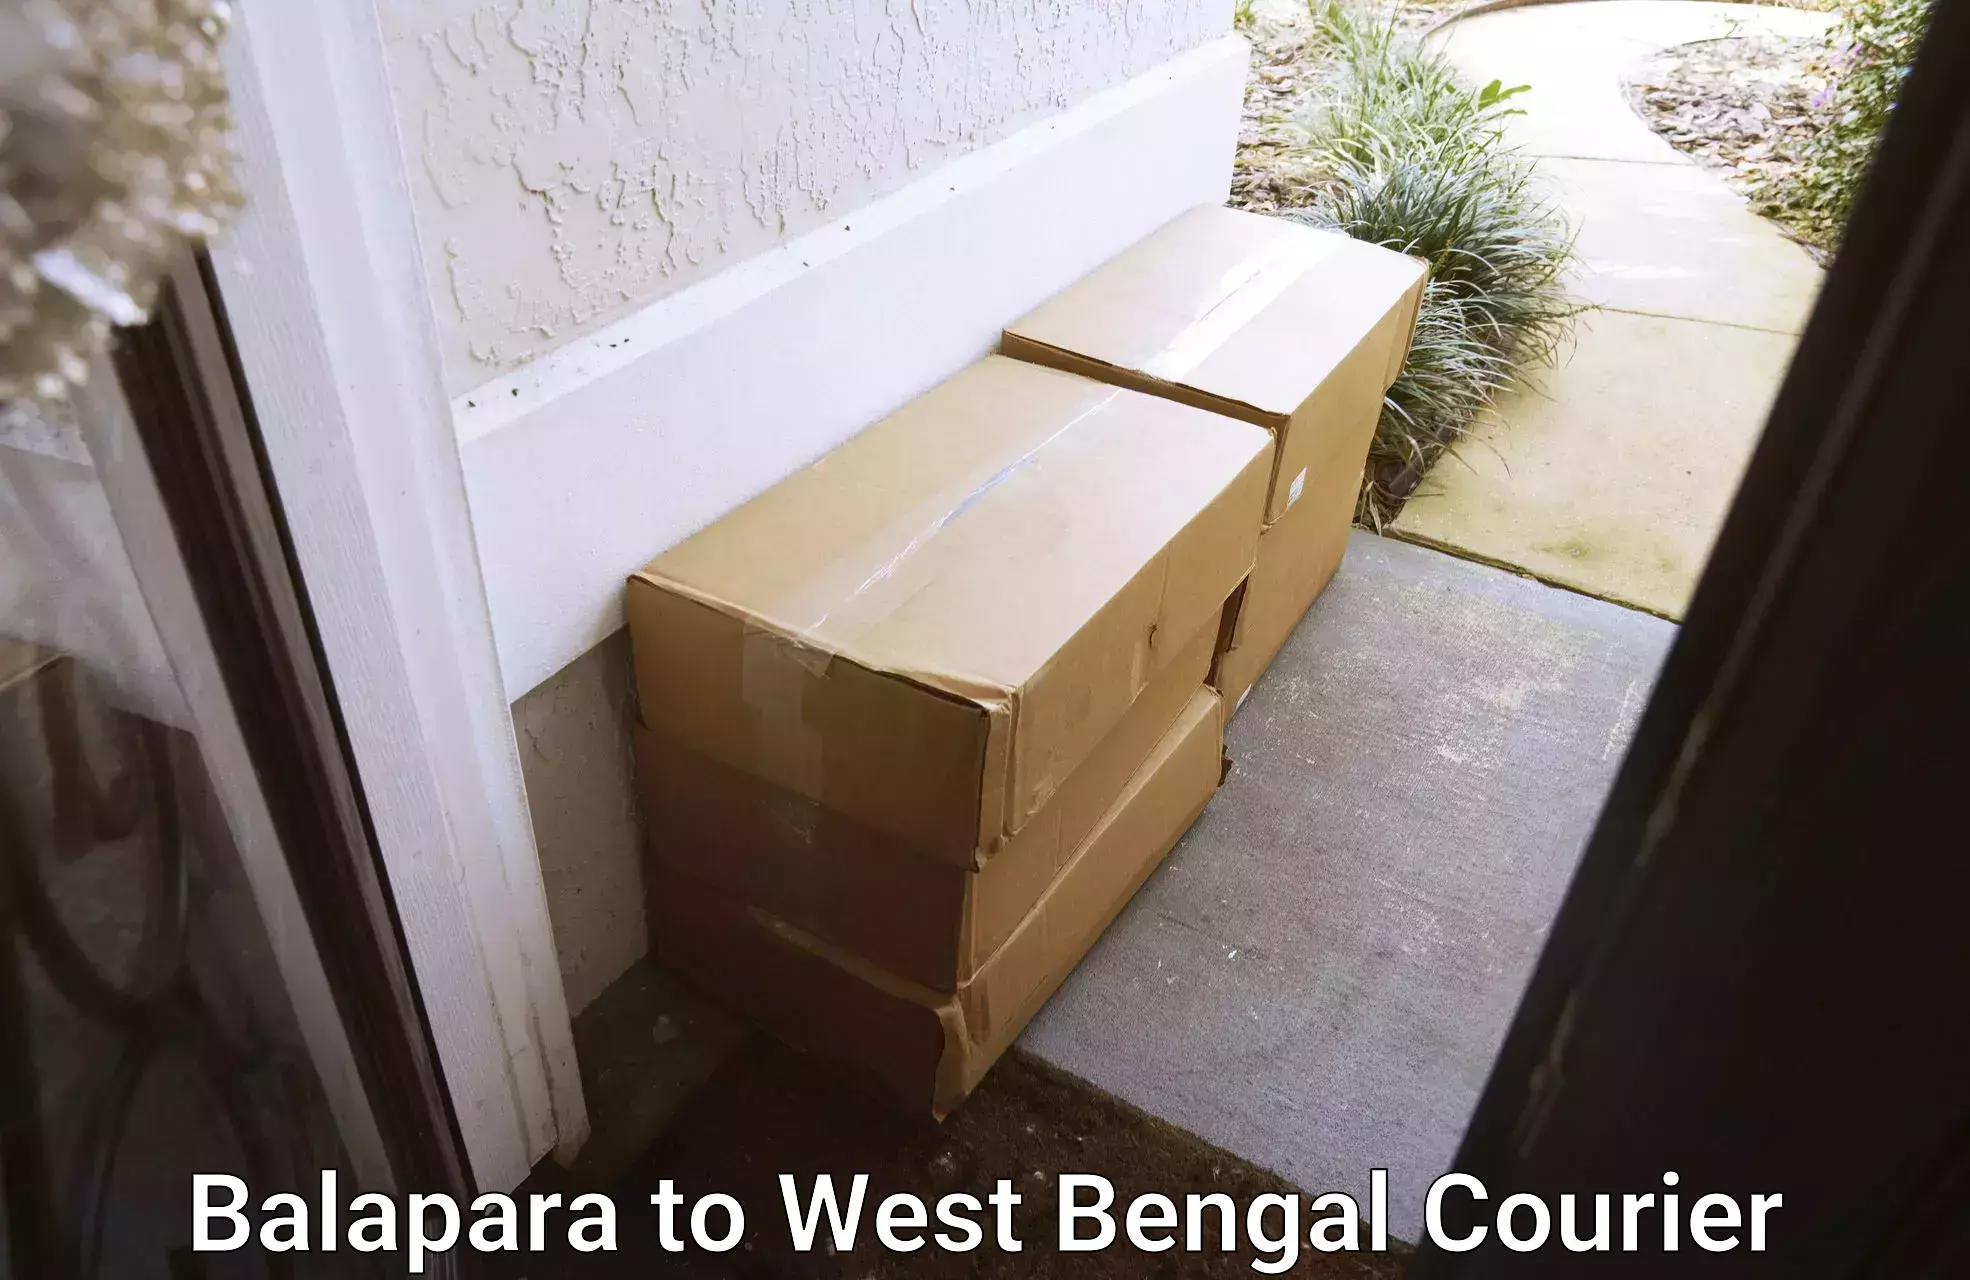 Courier service efficiency in Balapara to Taki